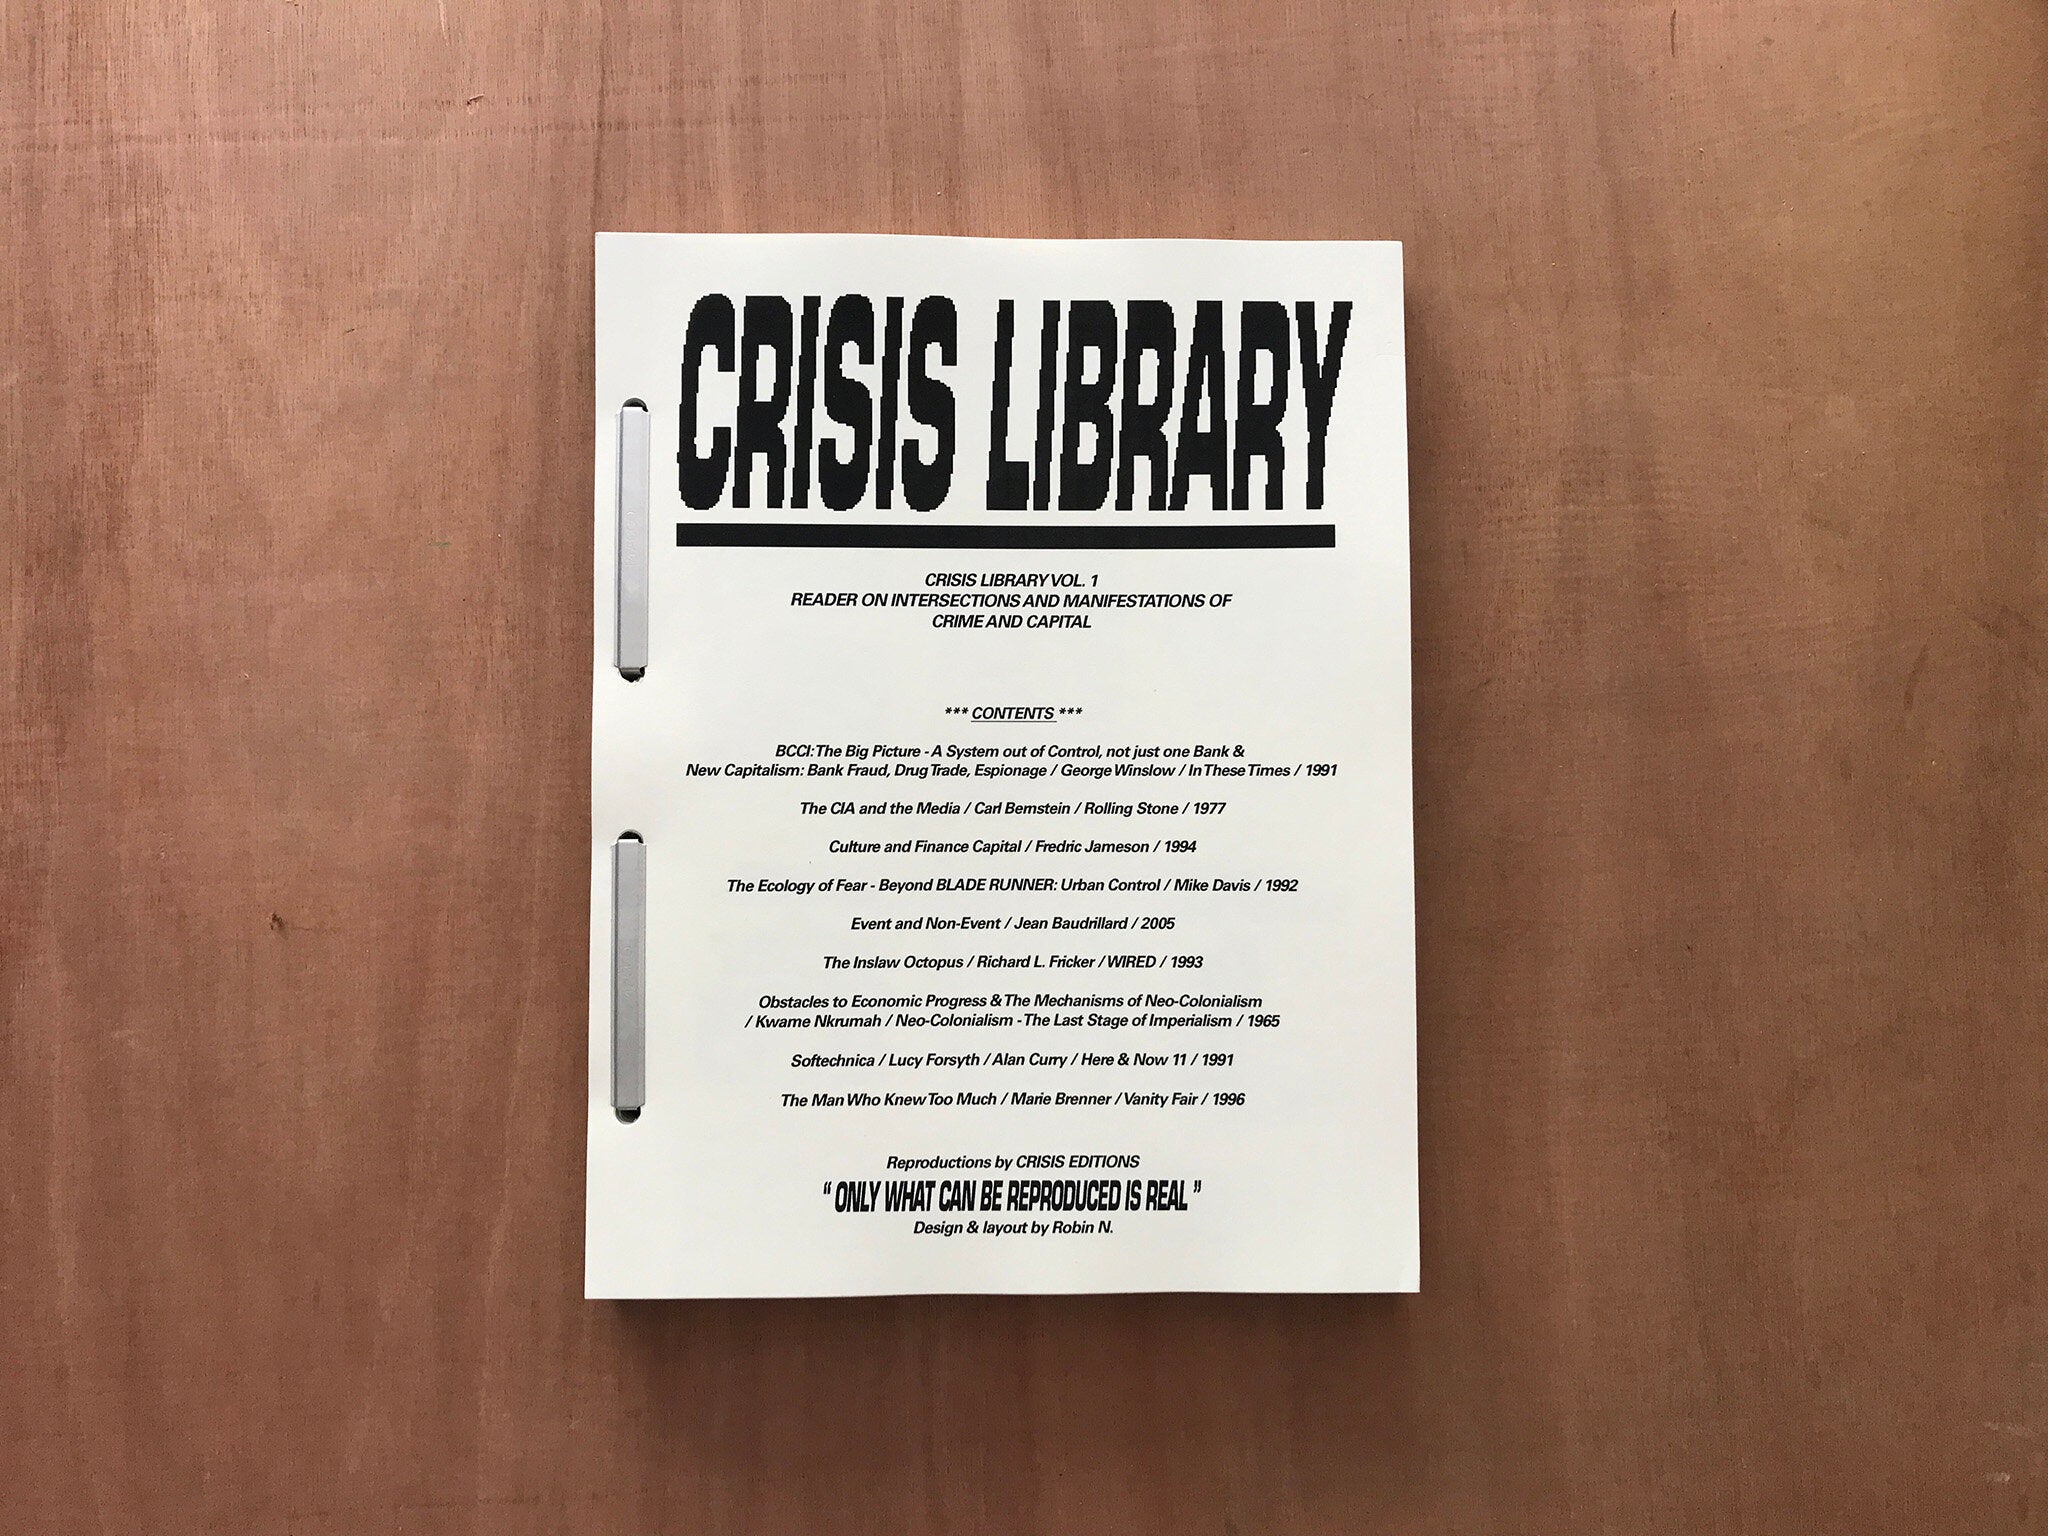 CRISIS LIBRARY READER by Robin N